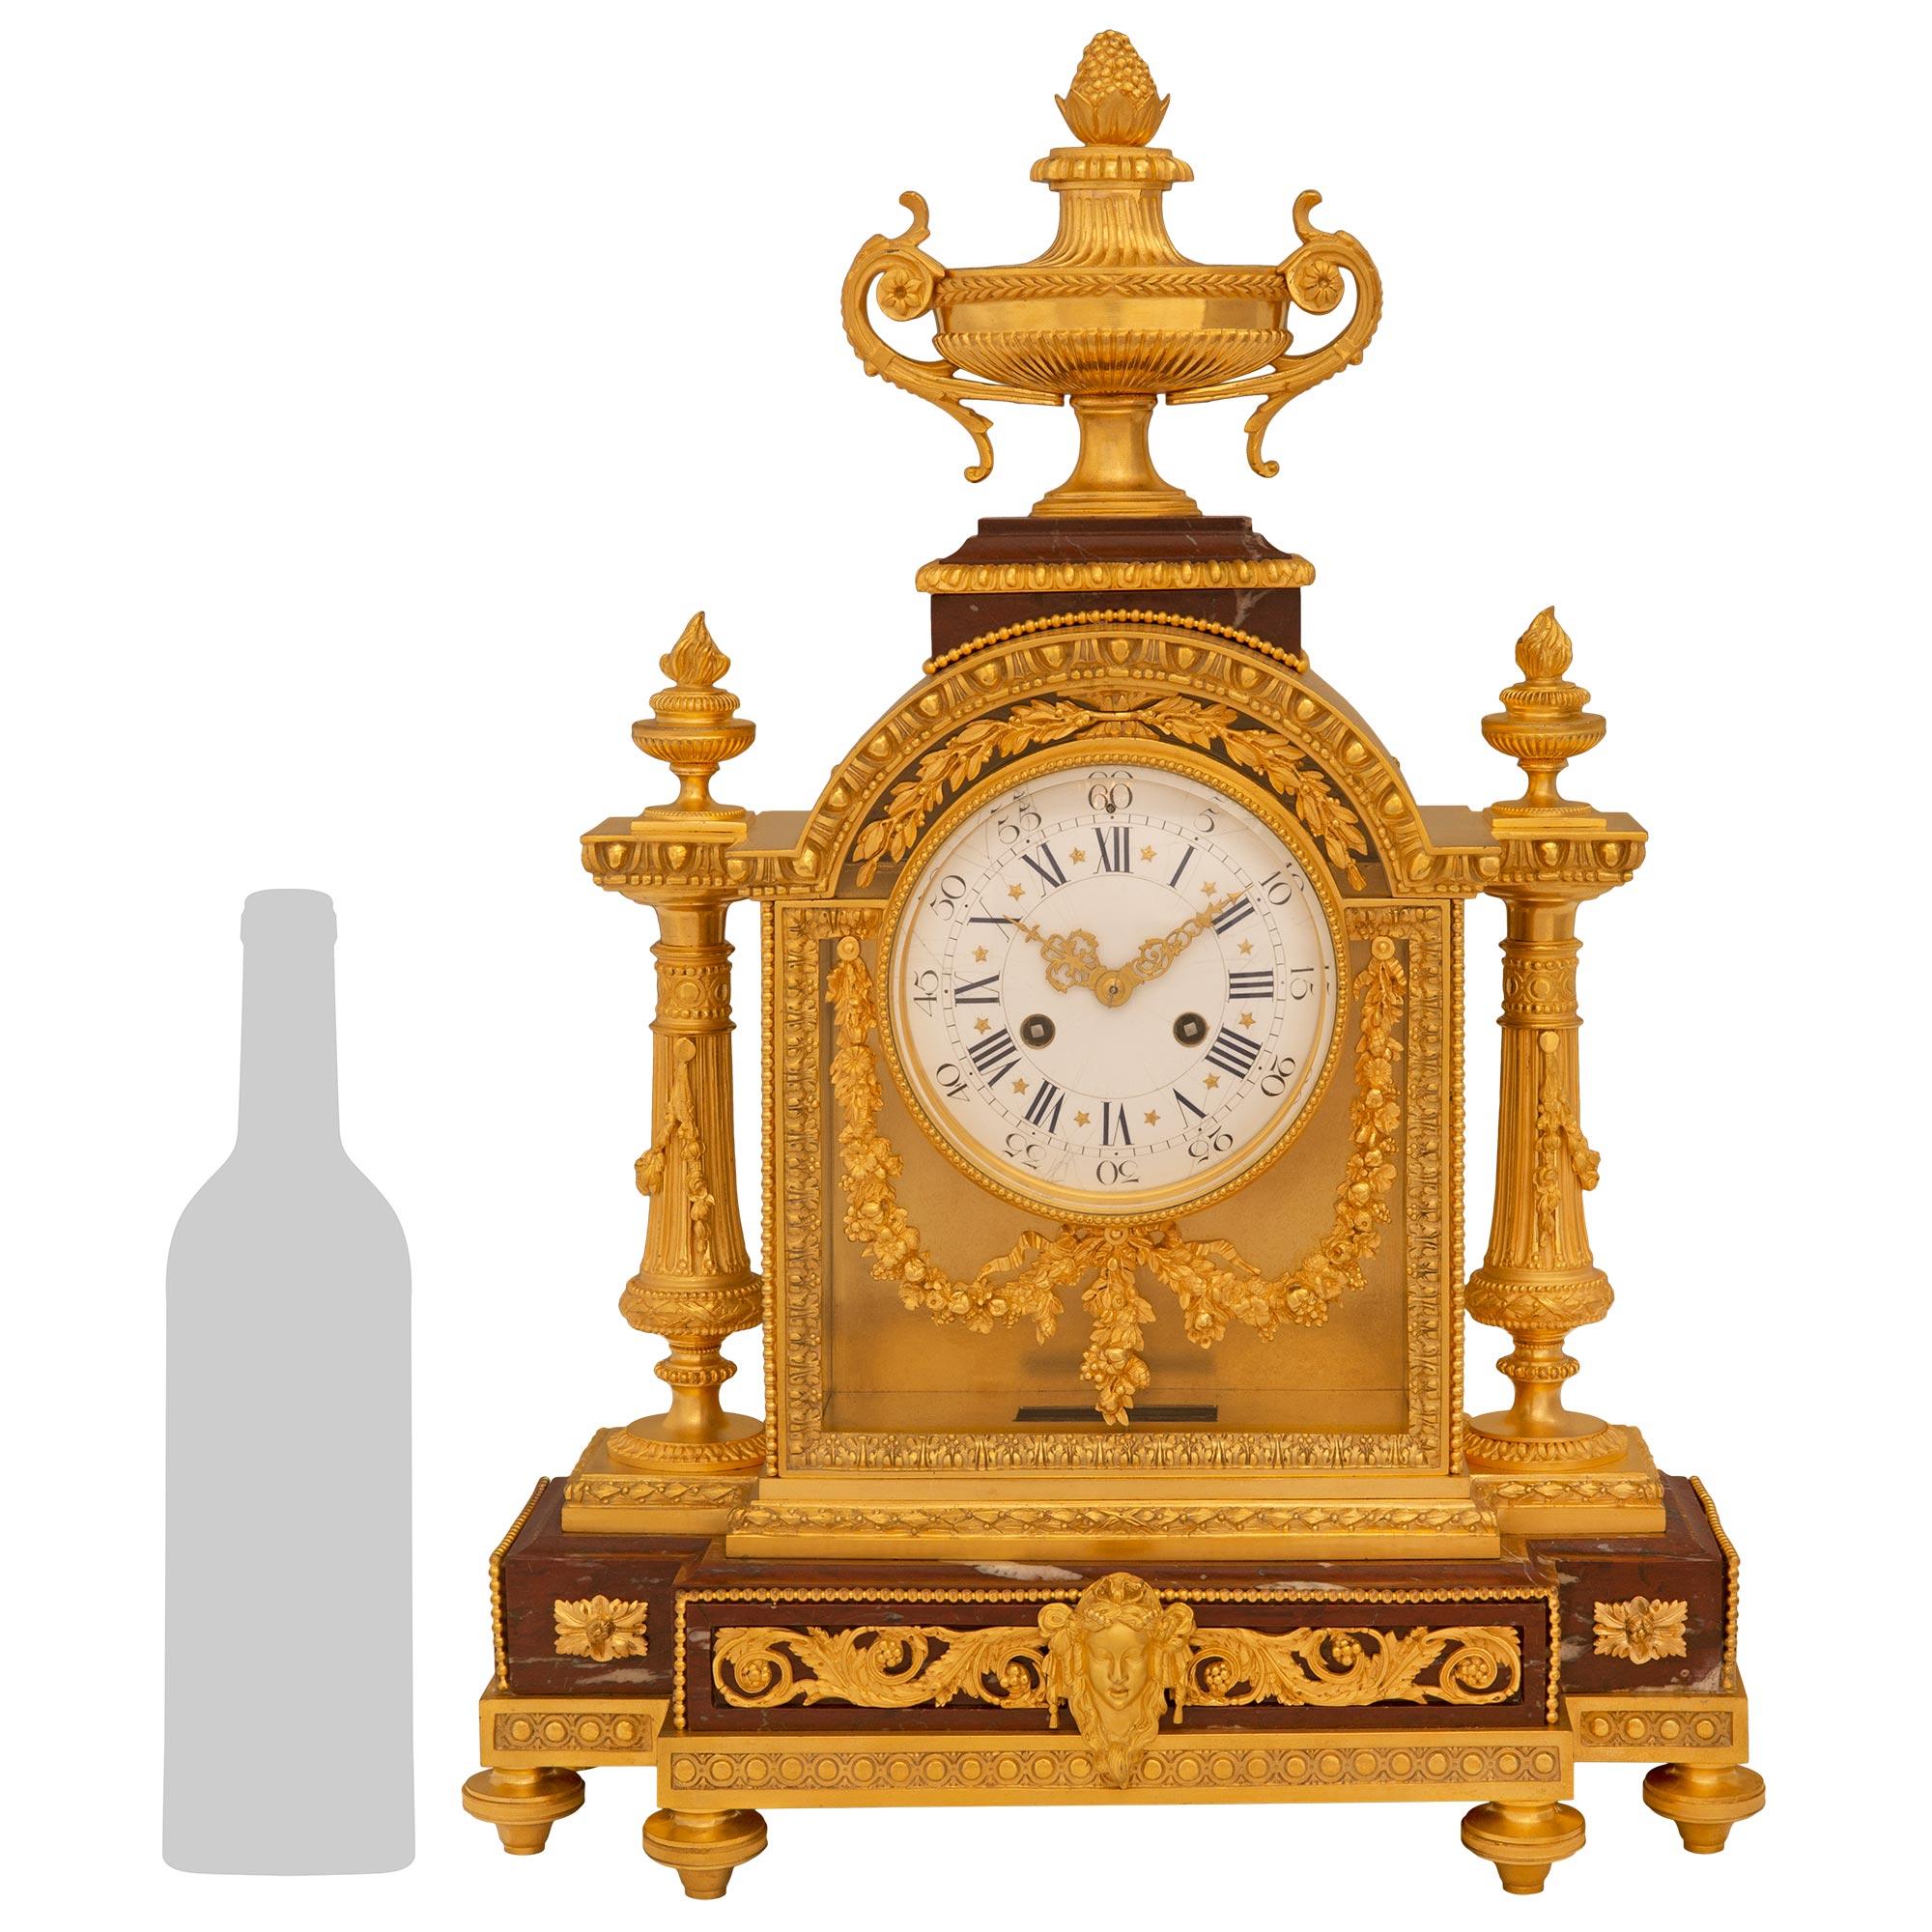 








A most elegant French 19th century Louis XVI st. Rouge Griotte marble and ormolu mounted clock signed Le Merle Charpentier Bronzier, Paris Rue Charlot. The clock is raised by six topie shaped ormolu sabots below the rectangular marble